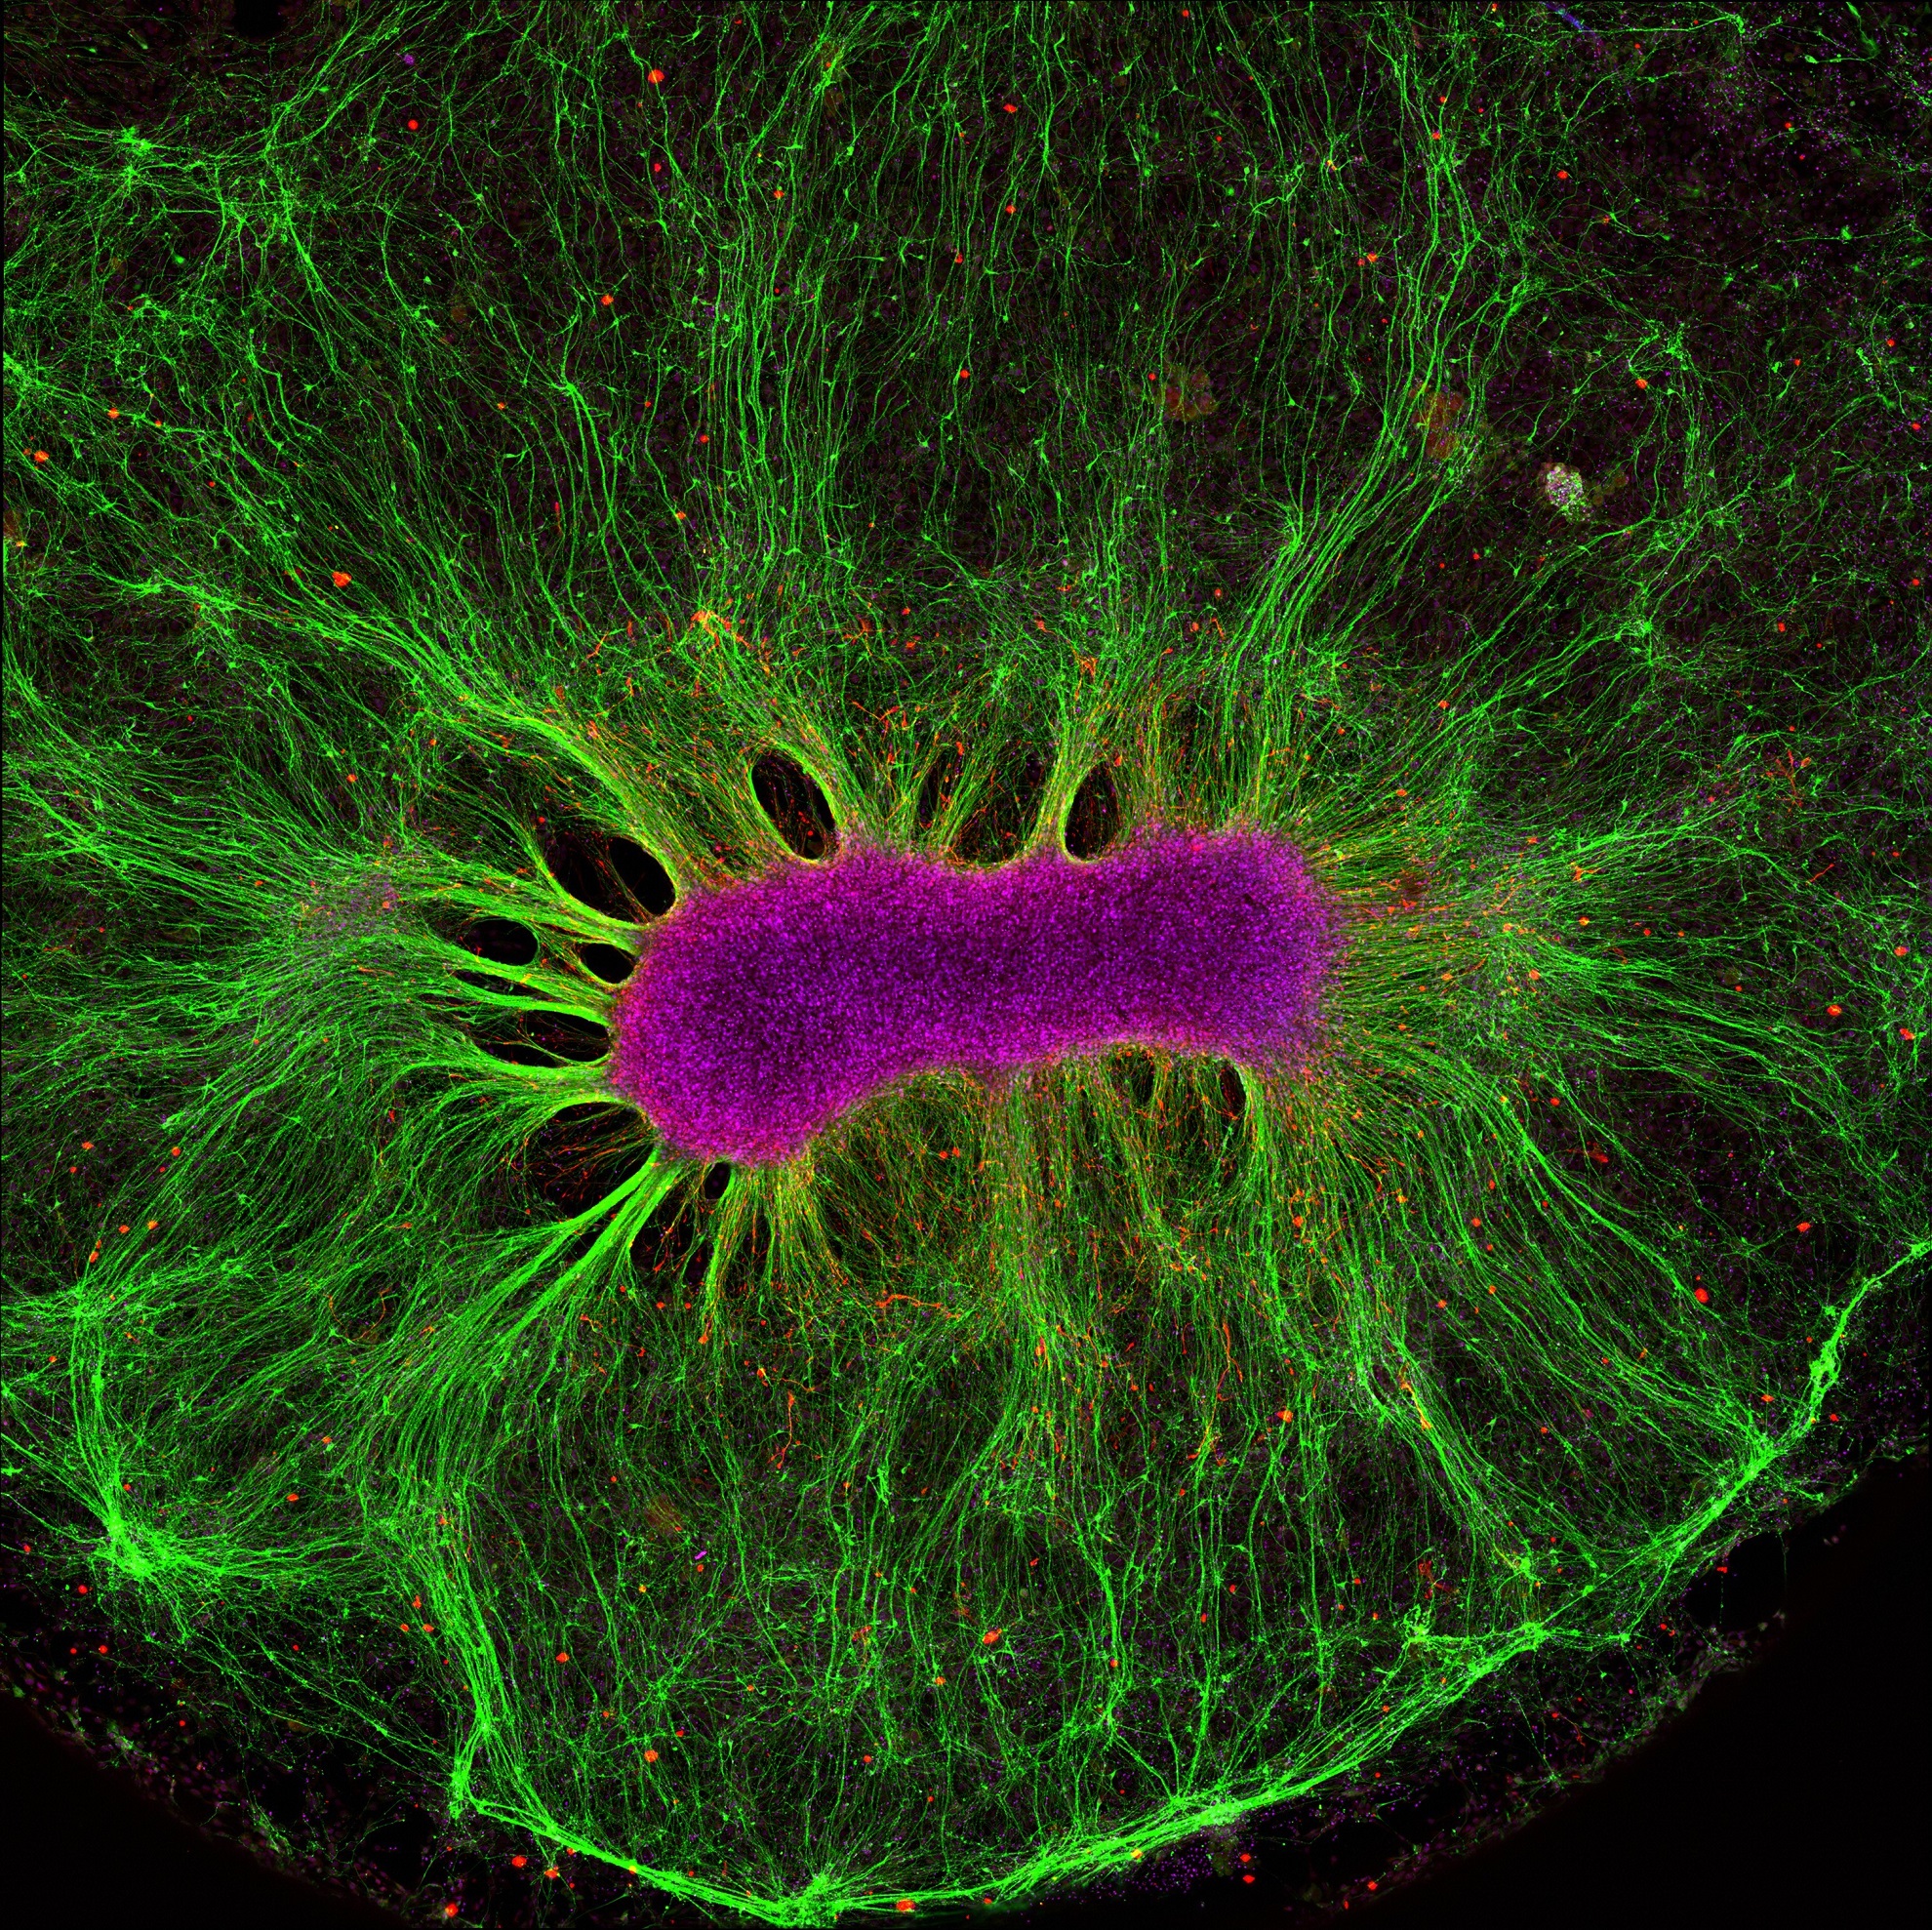 Neural stem cells have the ability to form all the different cell types found in the nervous system. Here, researchers are investigating how neural stem cells grow on a synthetic gel called PEG. After just two weeks, the stem cells (magenta) produced nerve fibres (green). These fibres grew away from the cell due to chemical gradients in the gel, teaching researchers about how their environment affects their structural organisation.